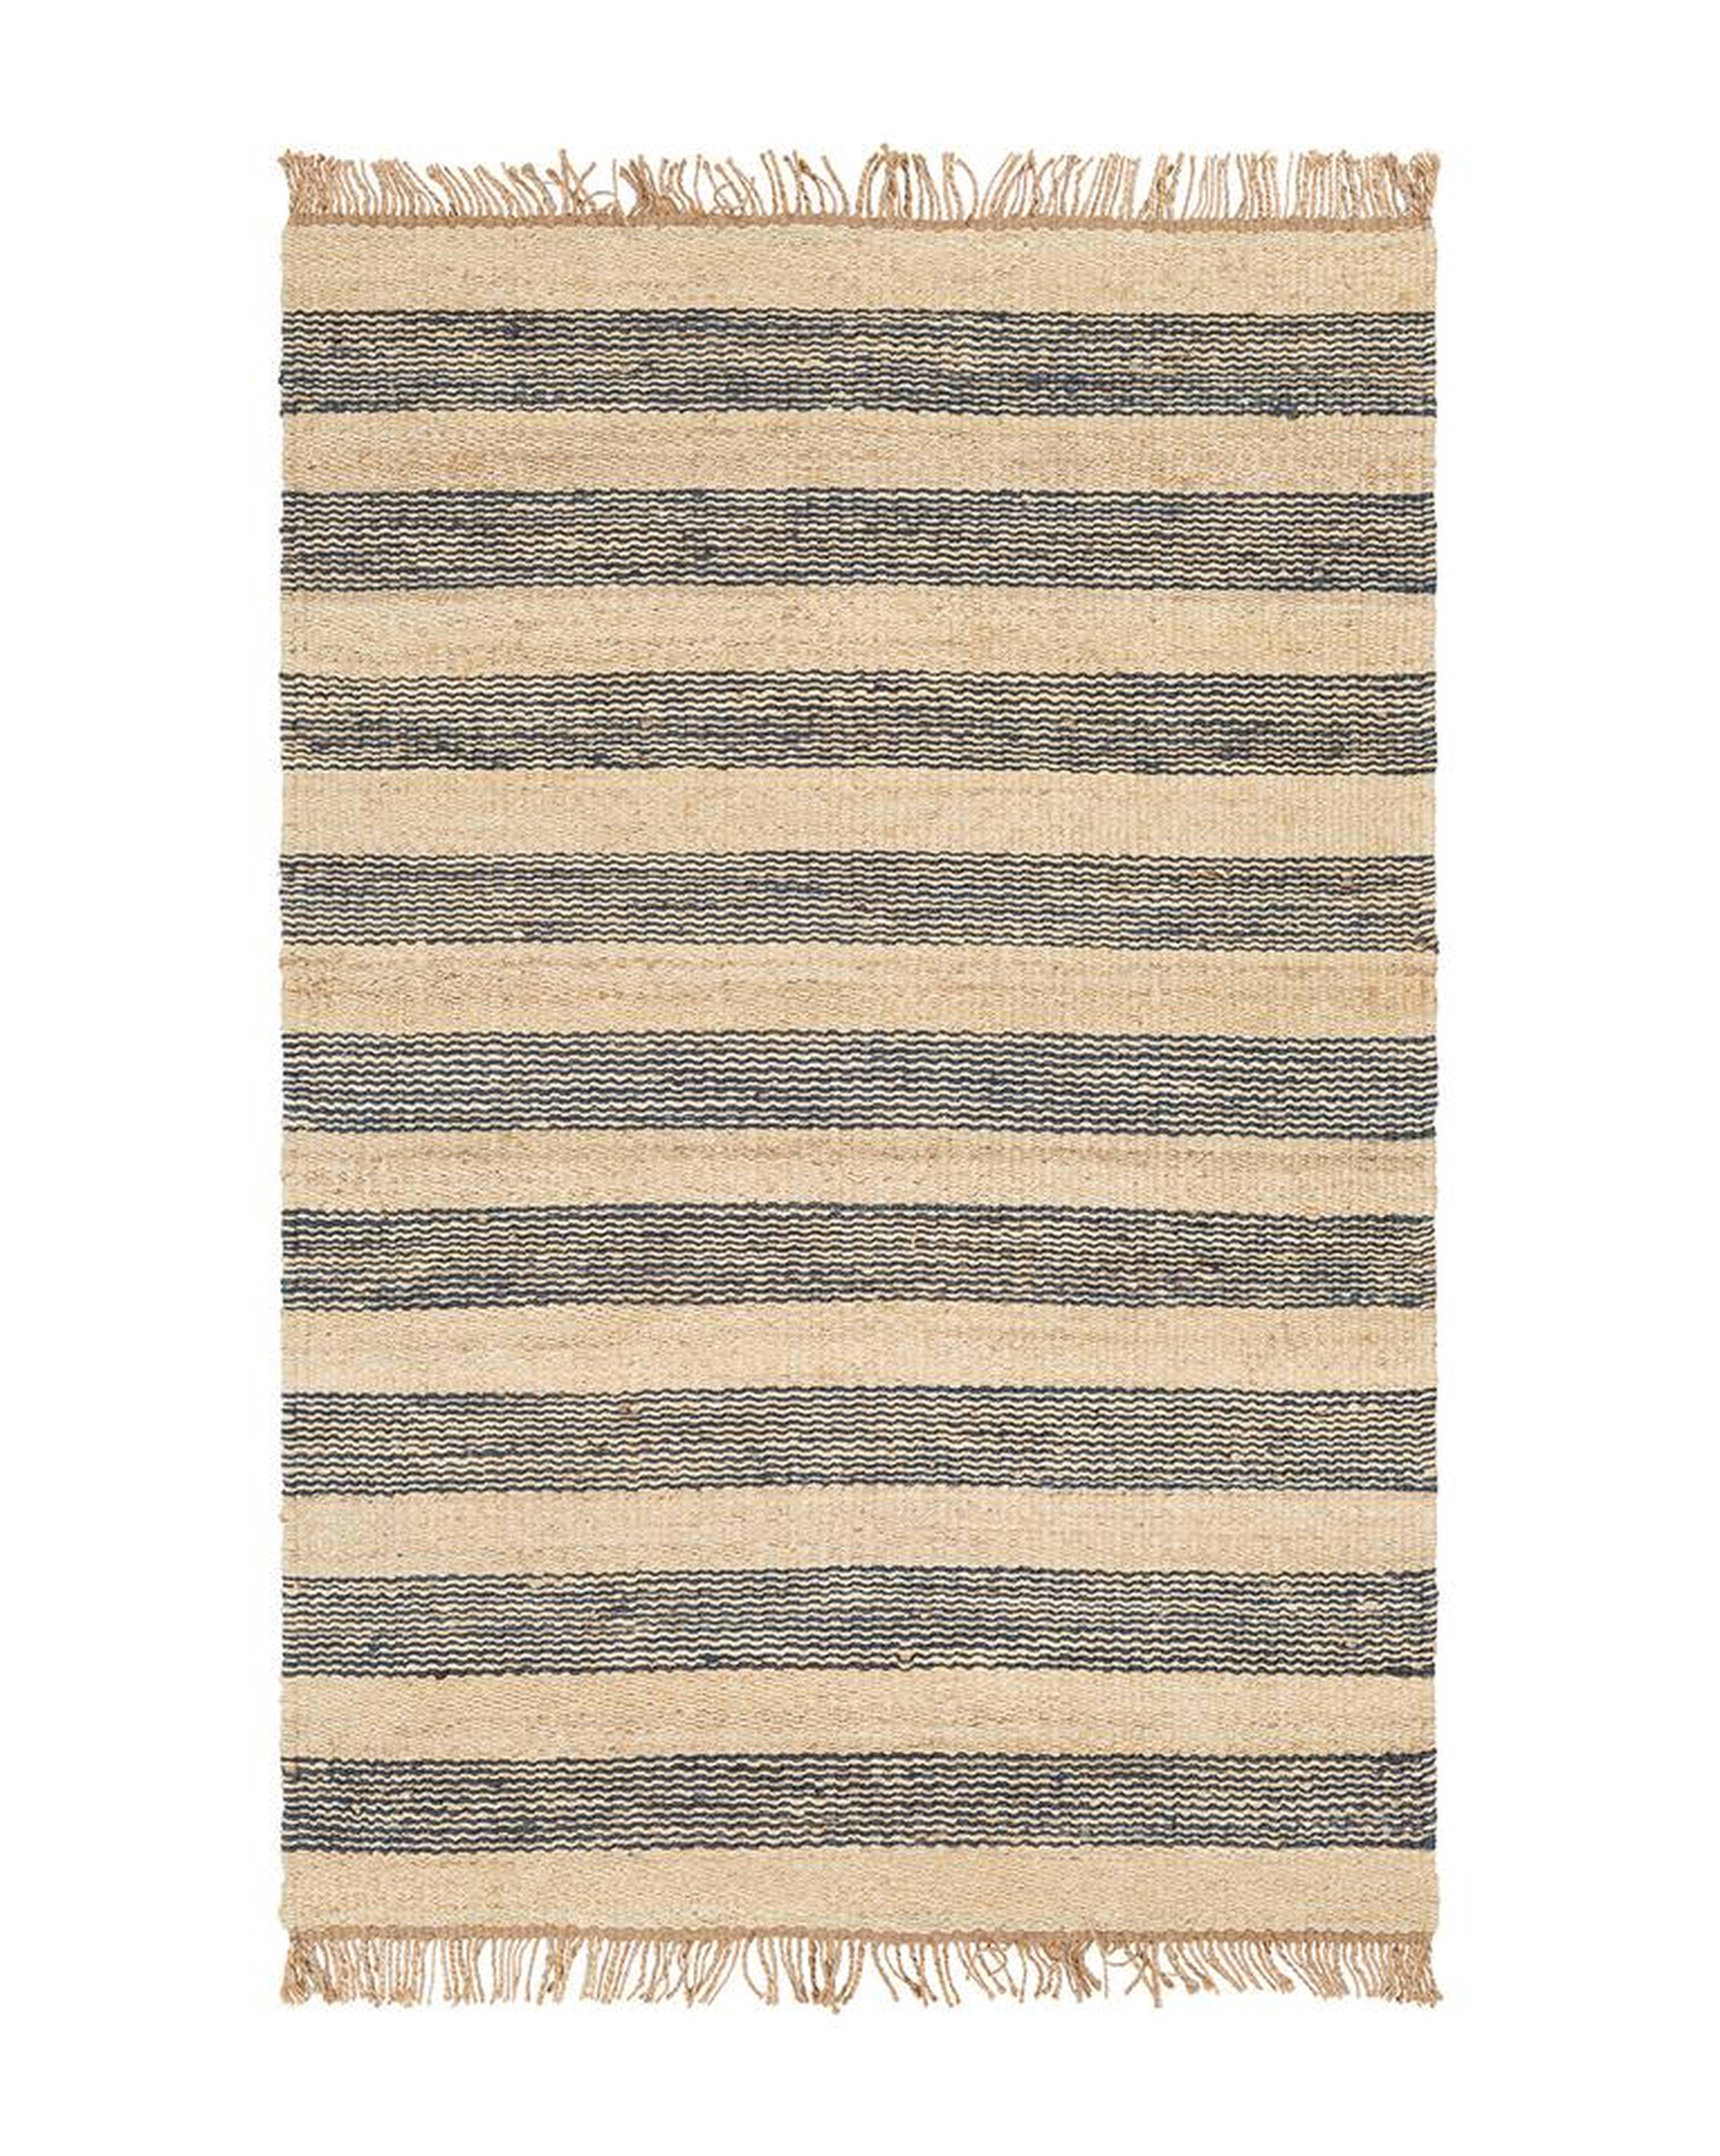 STOCKHOLM JUTE RUG, 8' x 10' - McGee & Co.